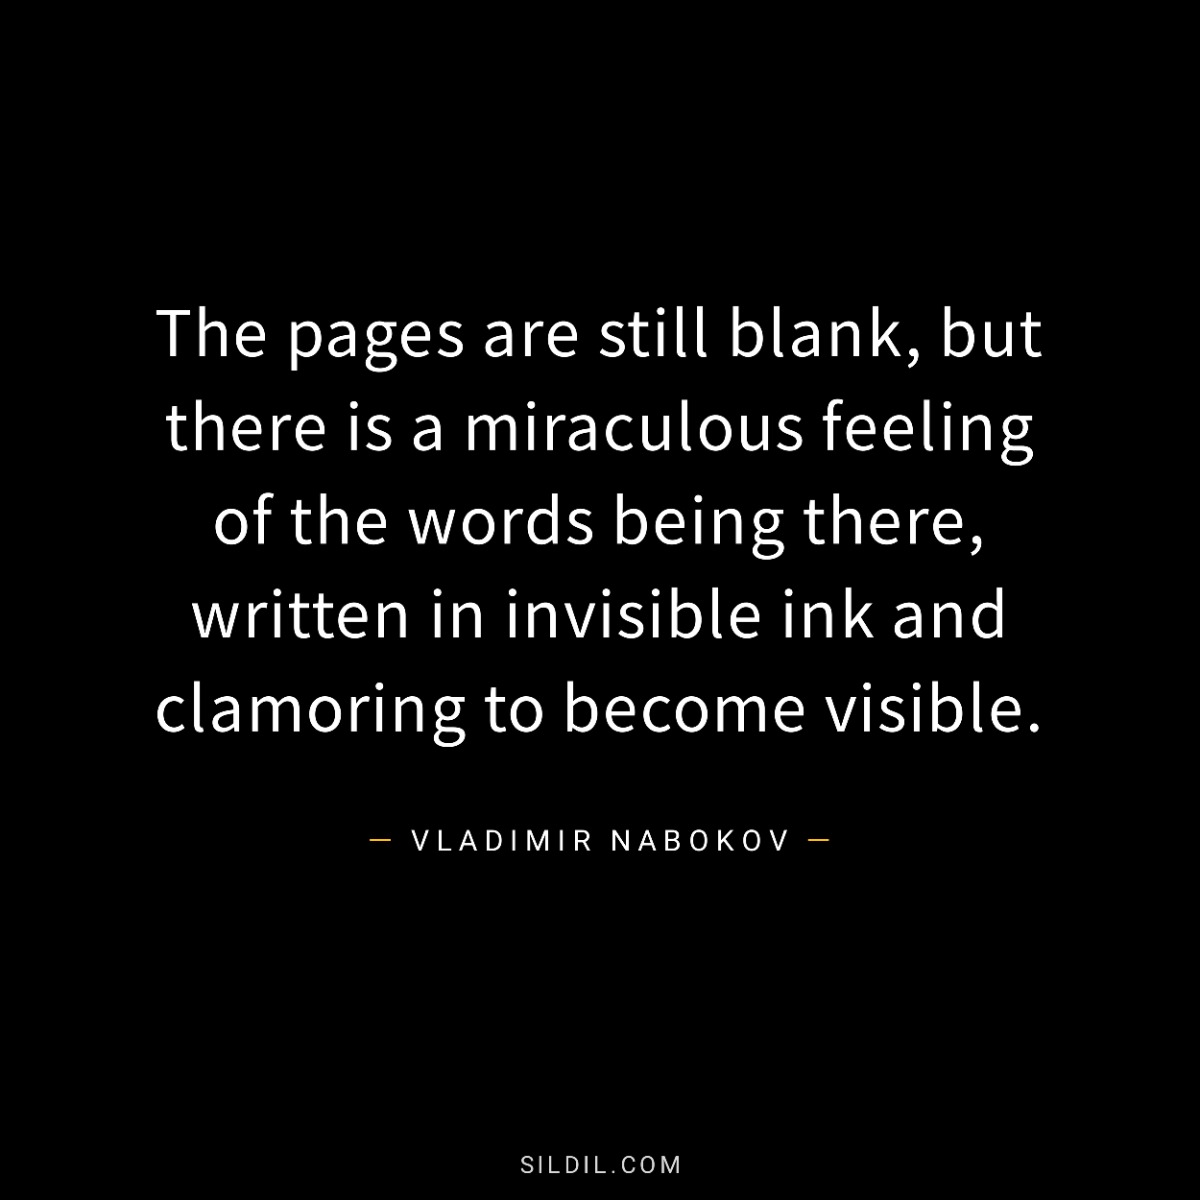 The pages are still blank, but there is a miraculous feeling of the words being there, written in invisible ink and clamoring to become visible.